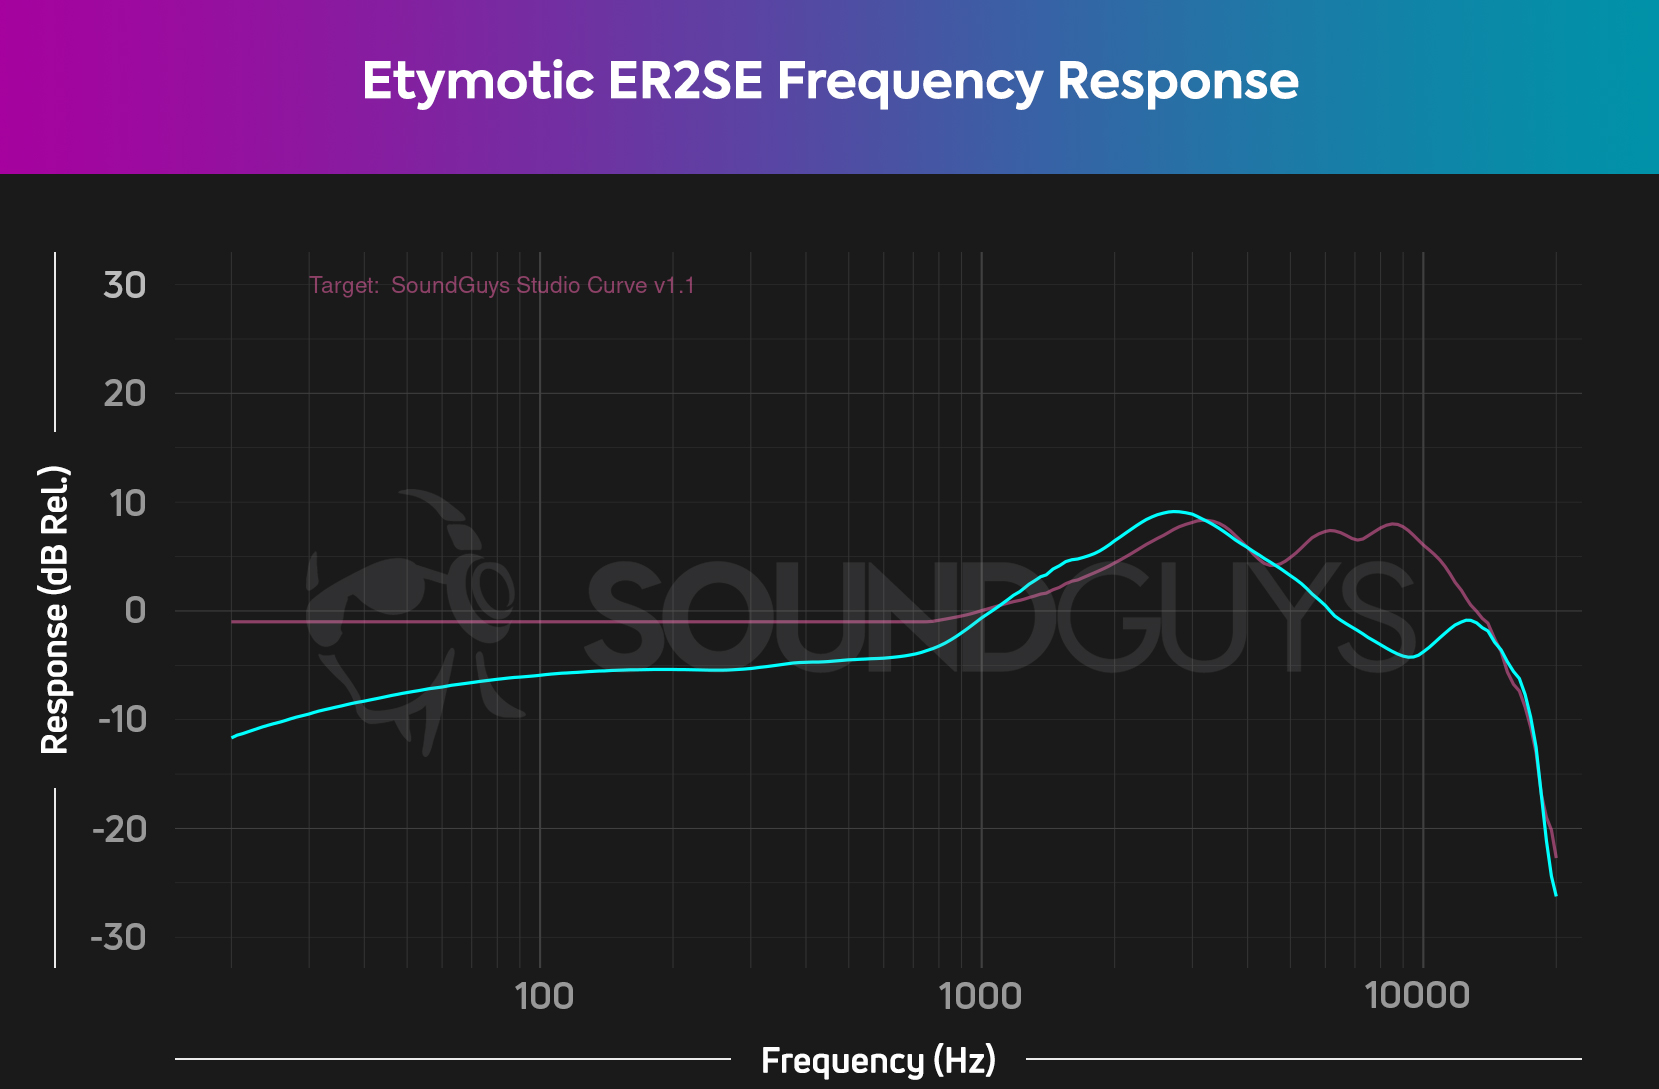 A chart depicts the Etymotic ER2SE (cyan) frequency response compared to the SoundGuys Studio Curve V1.1 pink), showing the ER2SE's under-emphasized bass.